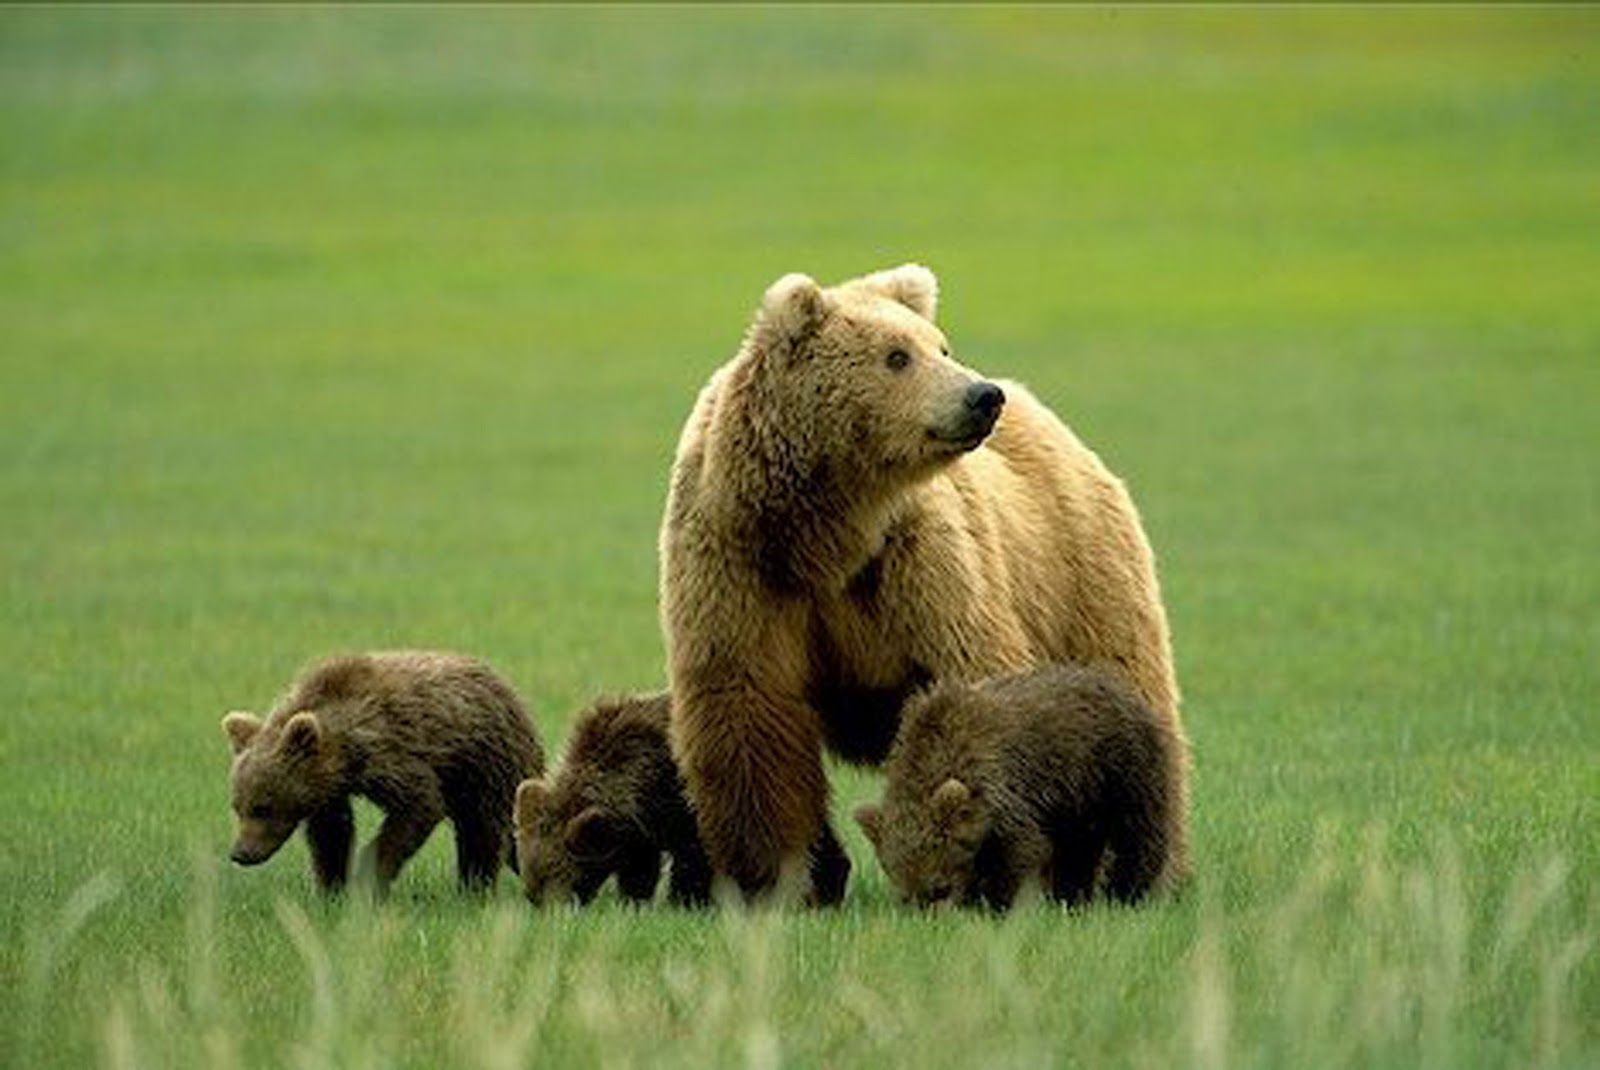 fond d'écran grizzly,ours brun,ours,grizzly,animal terrestre,prairie